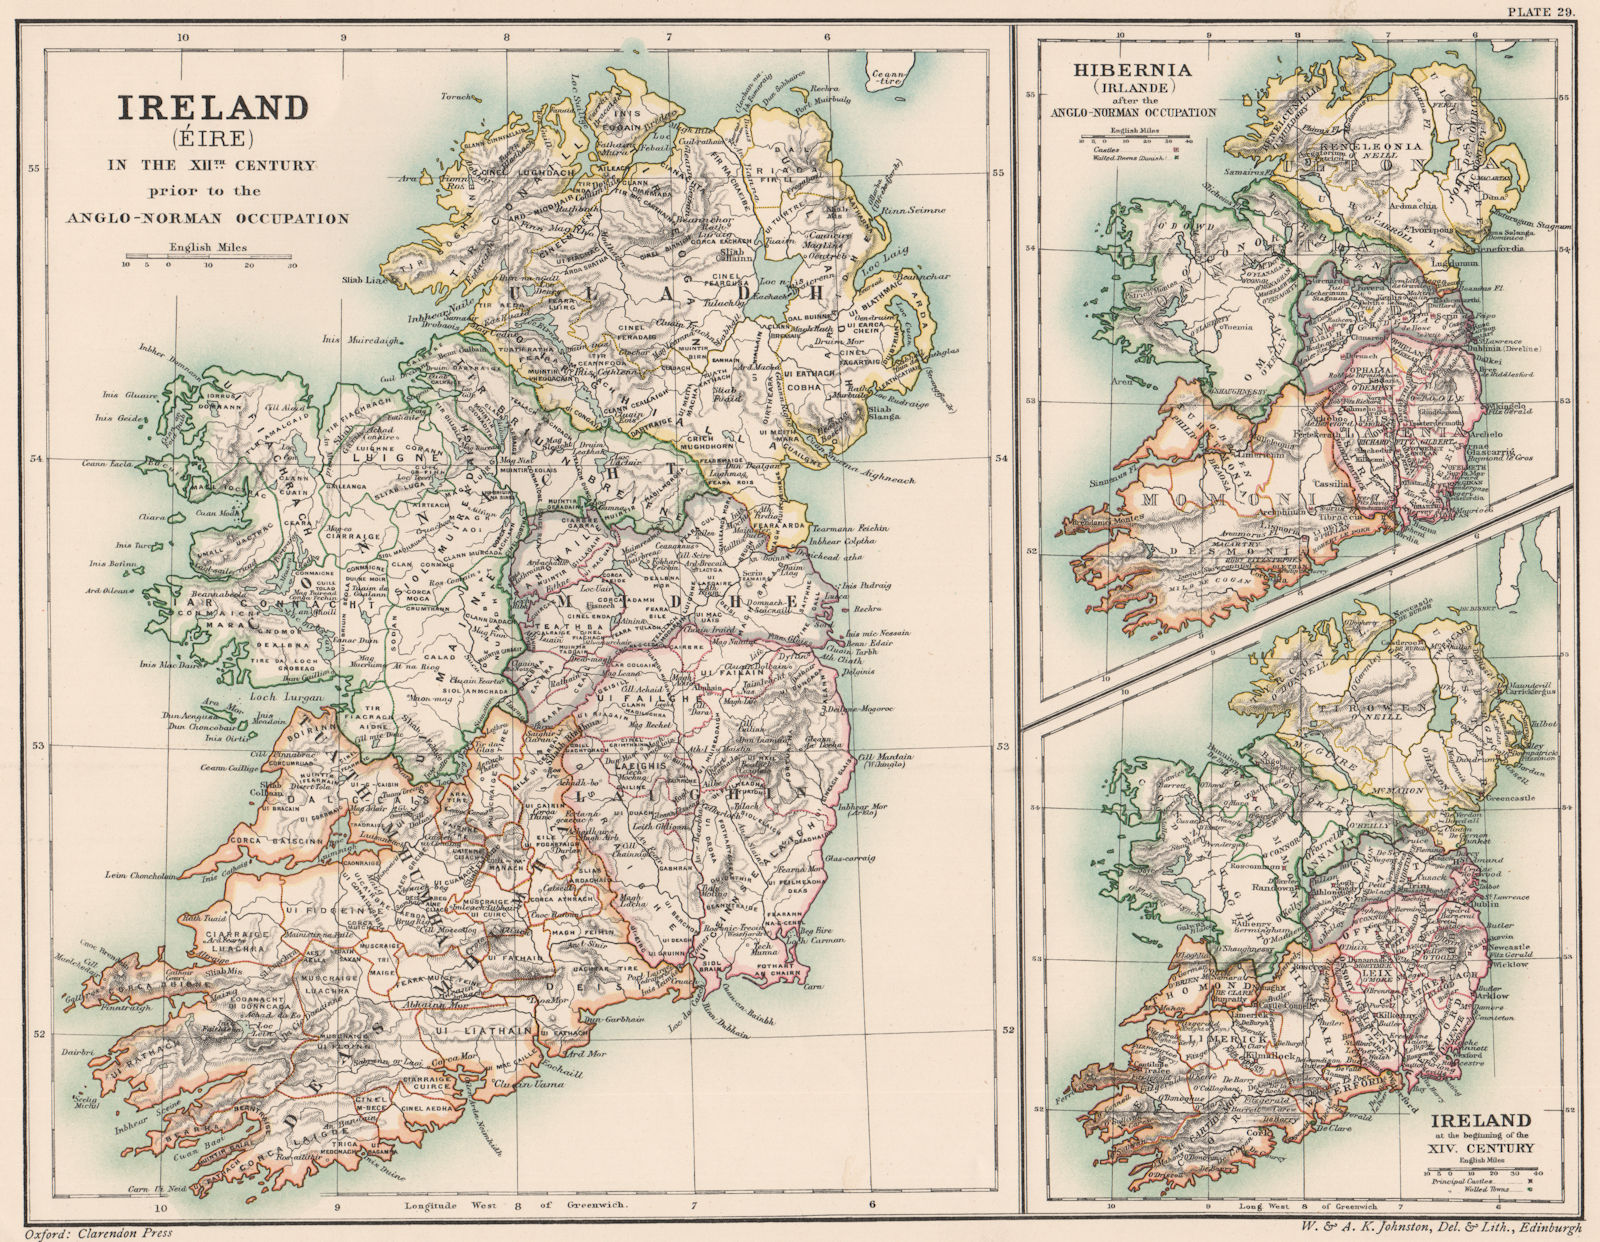 IRELAND EIRE HIBERNIA. 12th Century pre/post Anglo-Norman occupation 1902 map